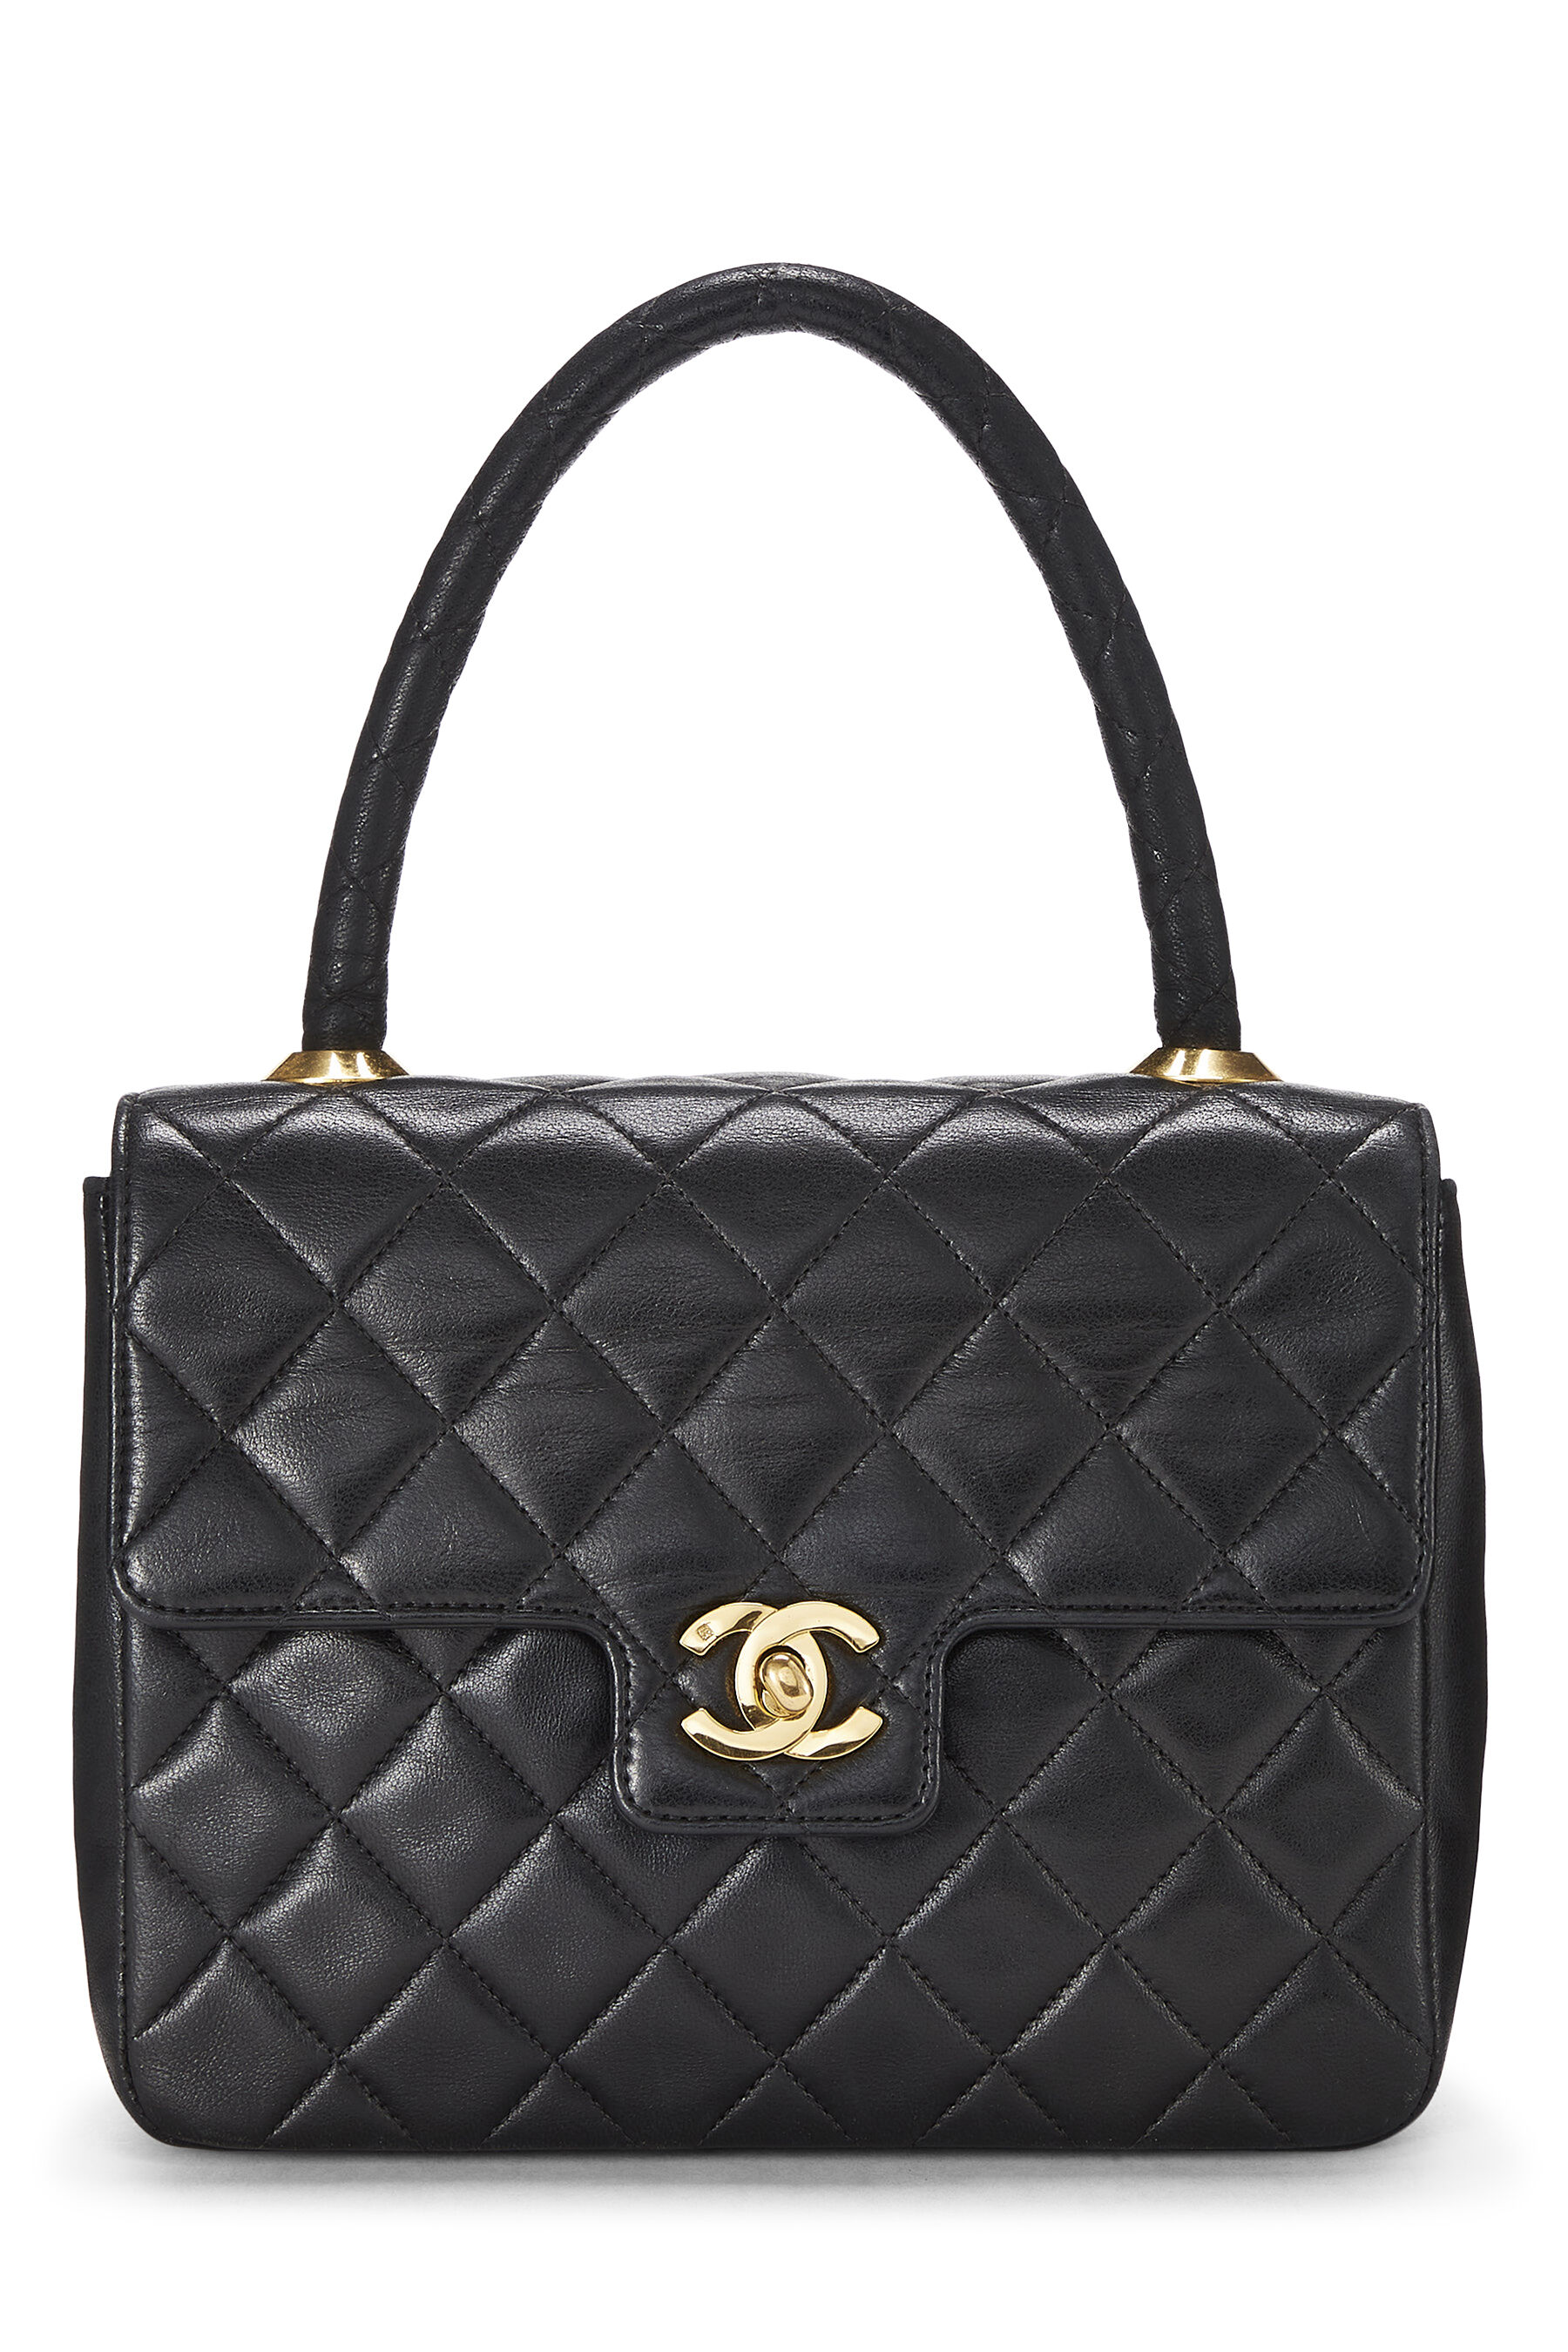 Chanel Black Quilted Lambskin Top Handle Bag